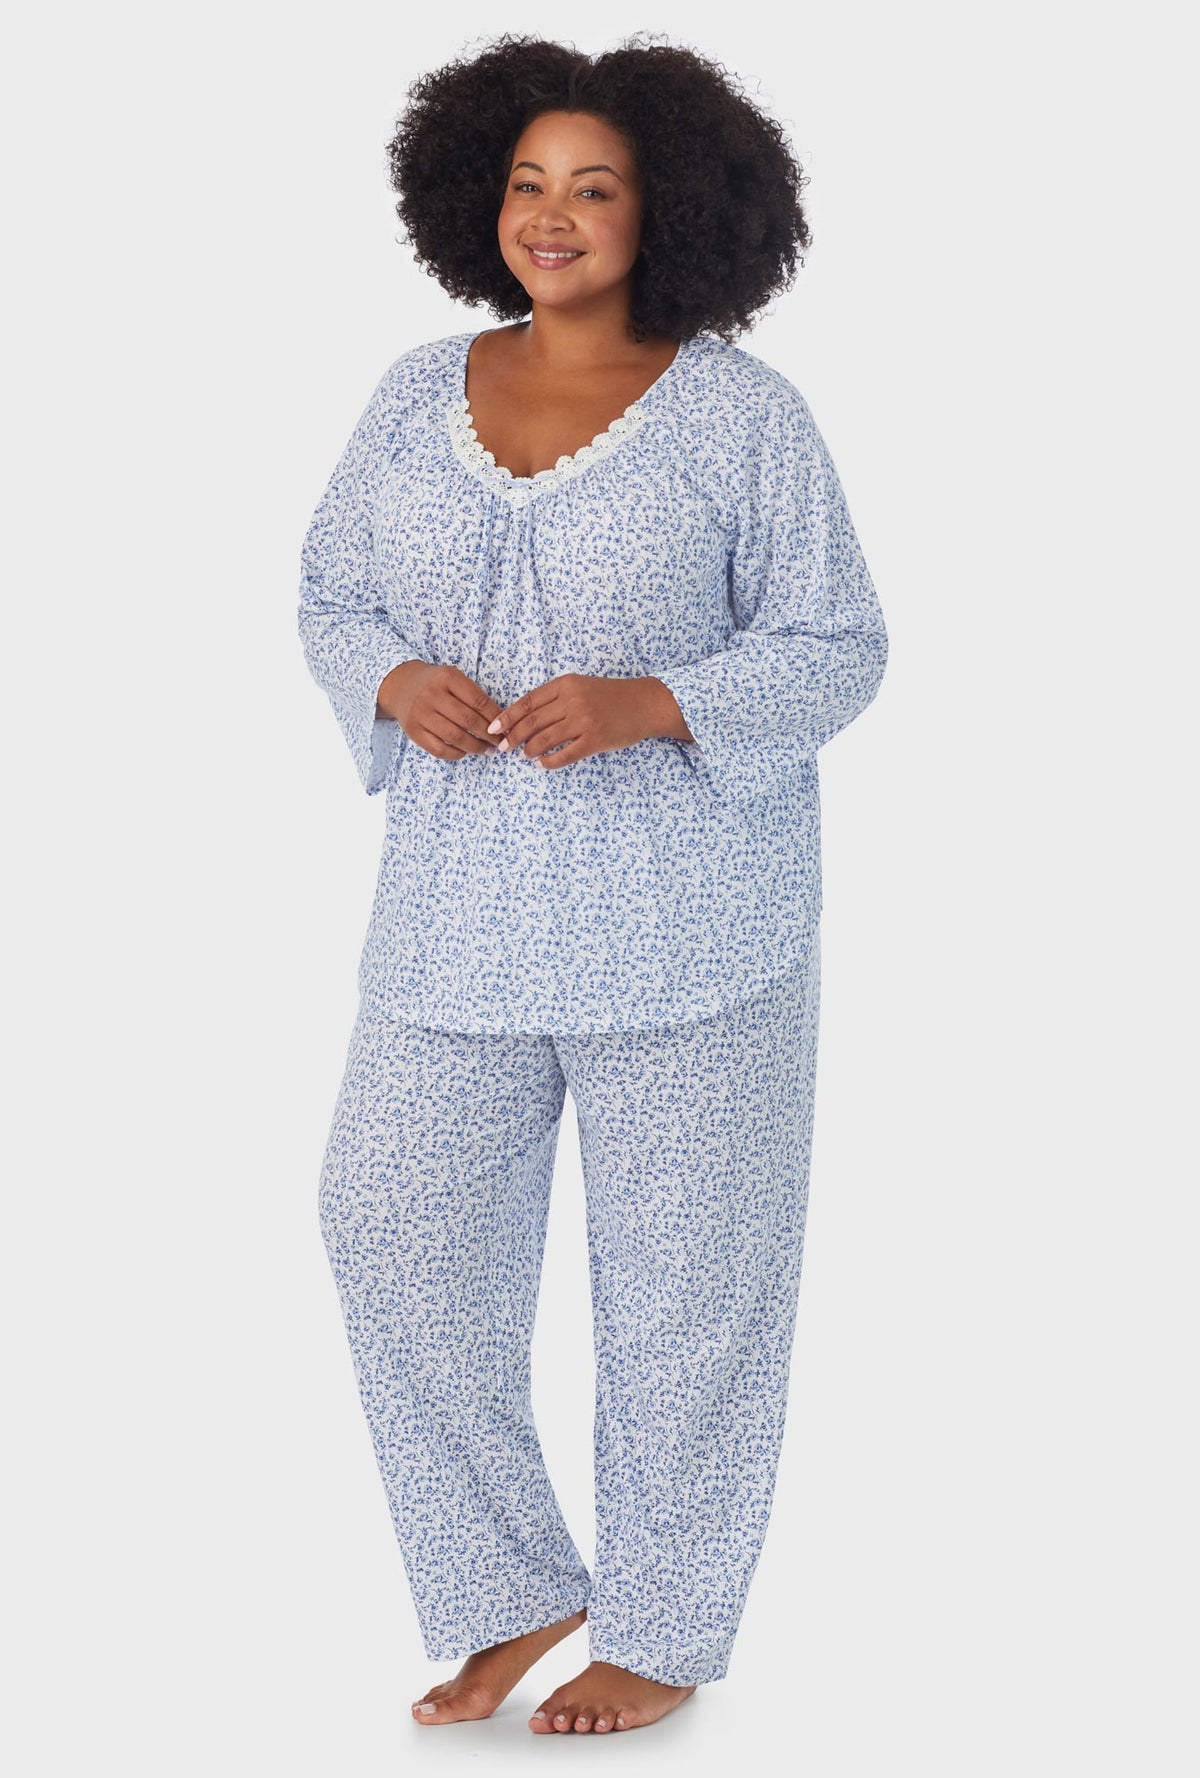 A lady wearing white Long Sleeve 3/4 Sleeve Long Pant plus size PJ Set with Dusty Blue  print